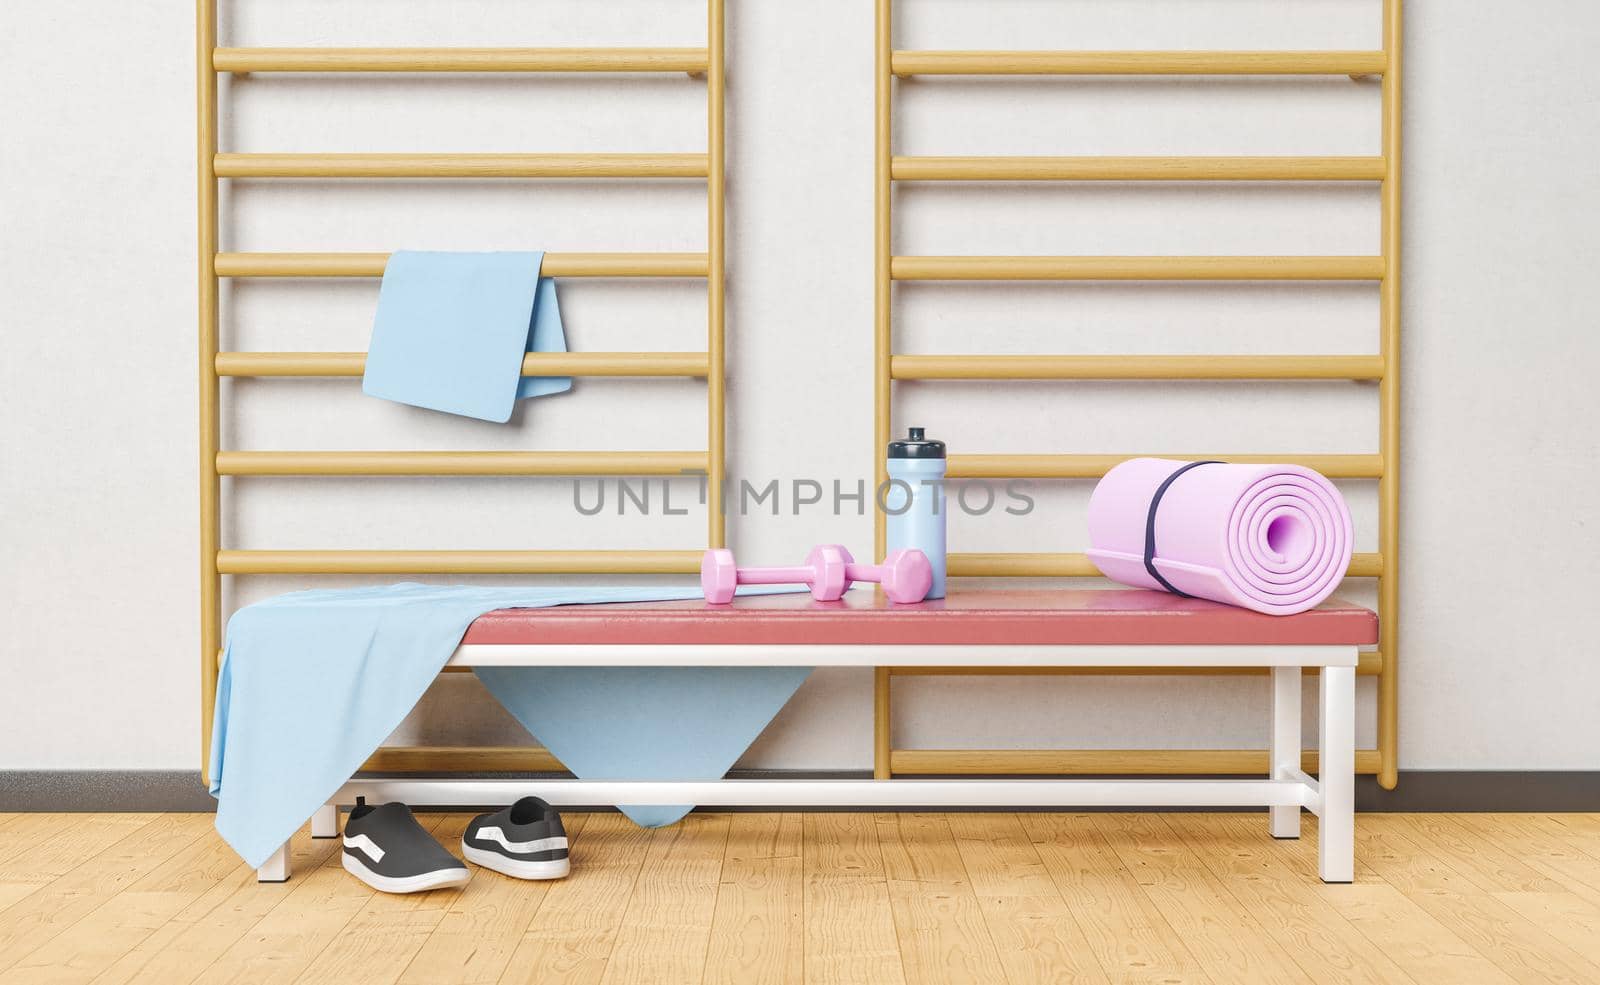 gym background with a bench, sneakers, water bottle, dumbbells and mat. concept of exercise, yoga, pilates, healthy living and training. 3d rendering